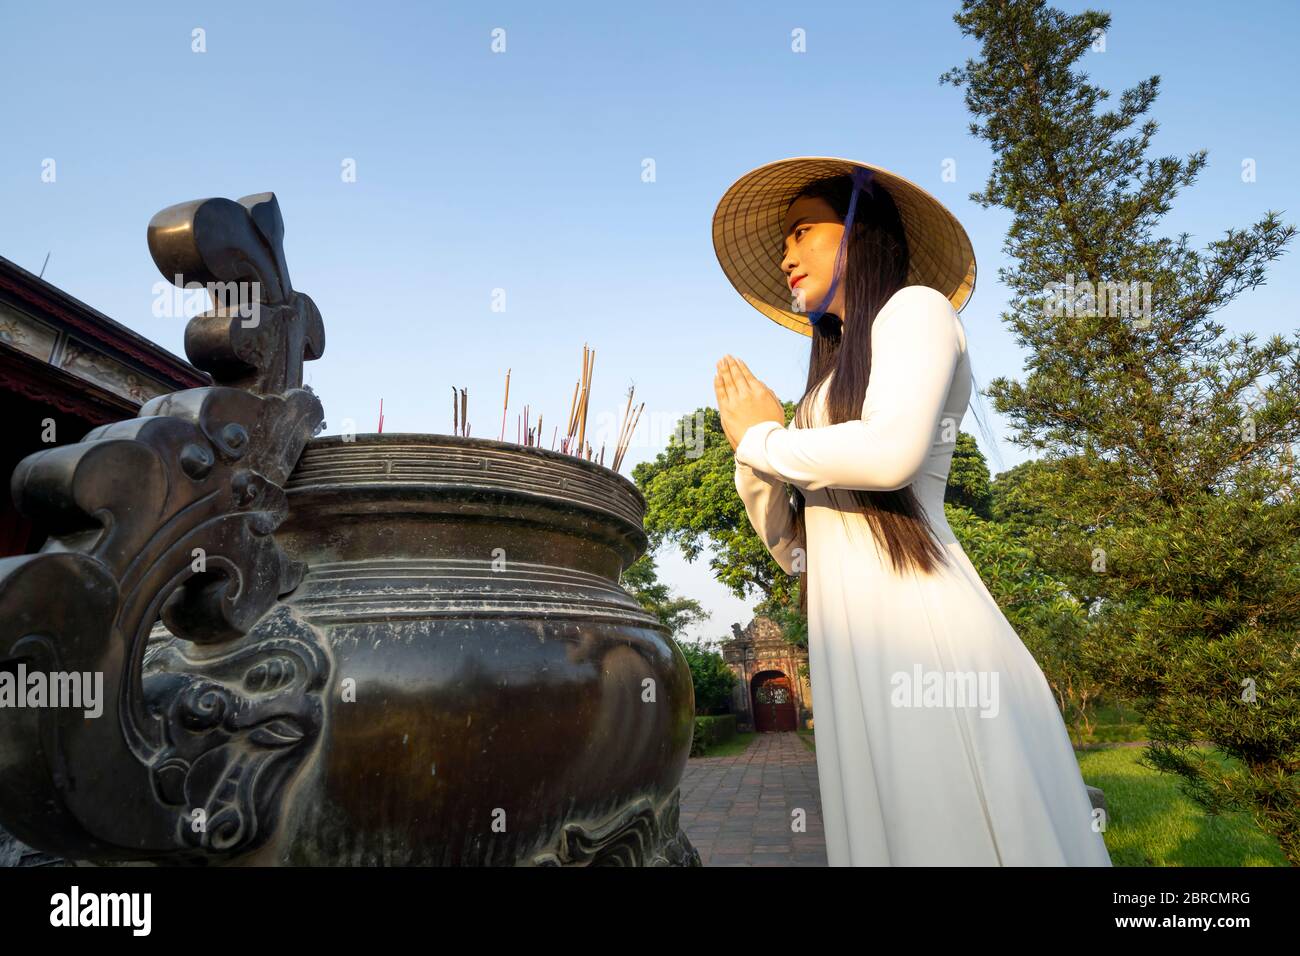 Hue City, Thua Thien Hue Province, Vietnam - May 7, 2020: A scene of a girl in a traditional ao dai costume praying inside a temple Stock Photo